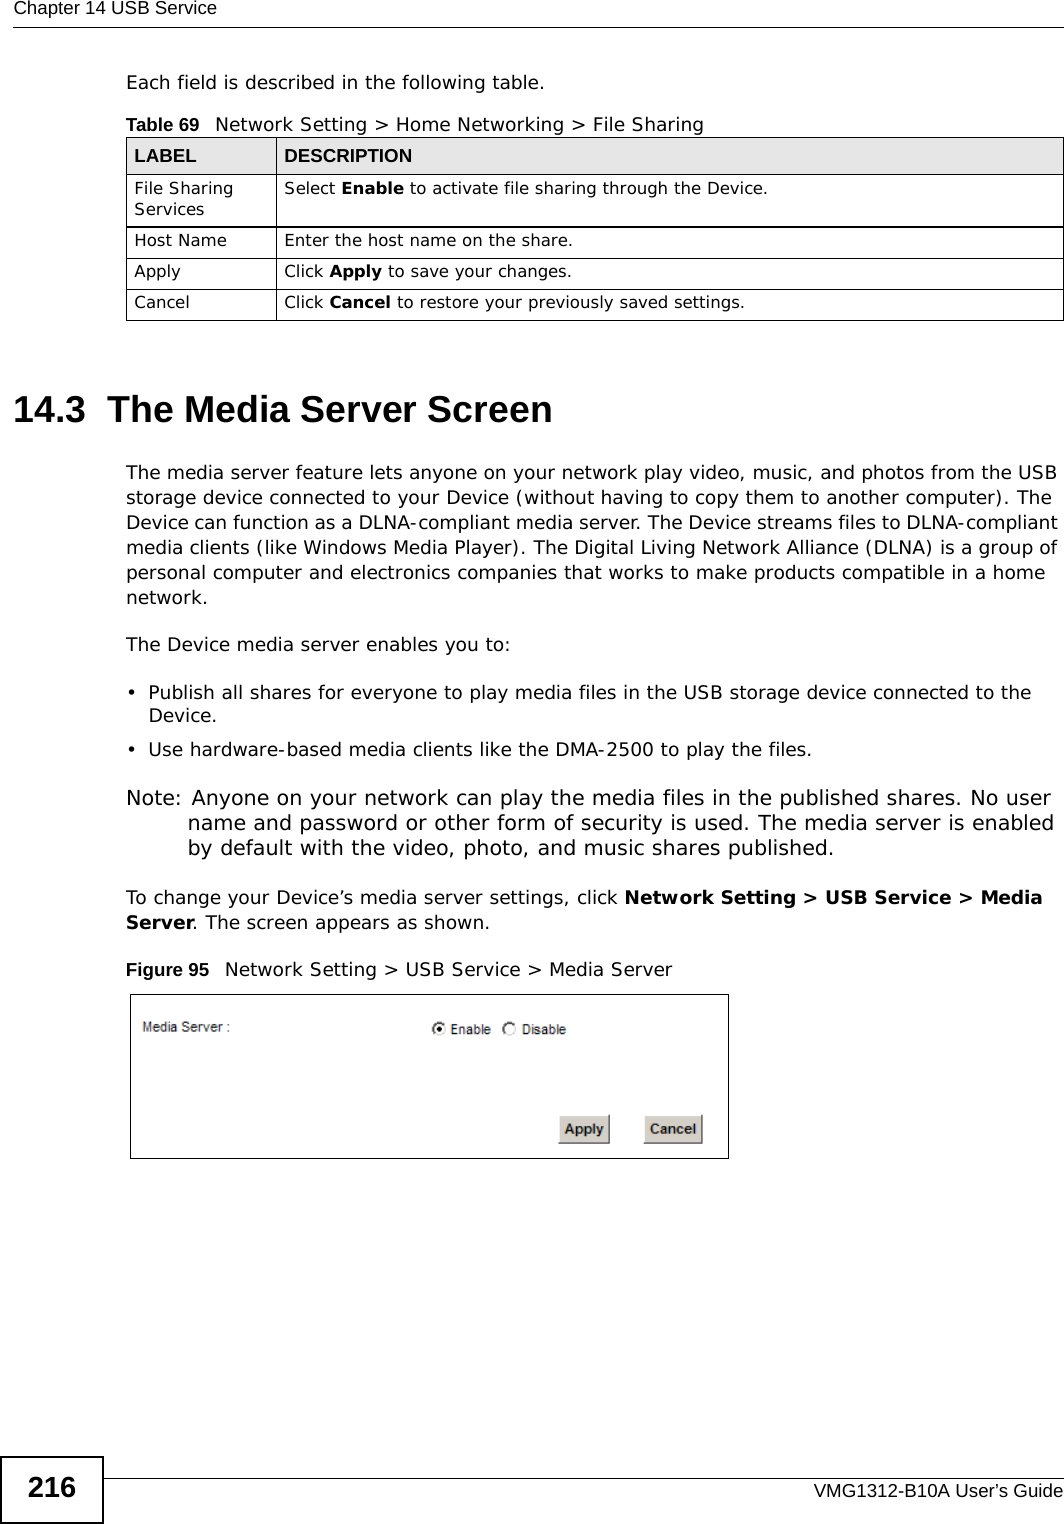 Chapter 14 USB ServiceVMG1312-B10A User’s Guide216Each field is described in the following table.14.3  The Media Server ScreenThe media server feature lets anyone on your network play video, music, and photos from the USB storage device connected to your Device (without having to copy them to another computer). The Device can function as a DLNA-compliant media server. The Device streams files to DLNA-compliant media clients (like Windows Media Player). The Digital Living Network Alliance (DLNA) is a group of personal computer and electronics companies that works to make products compatible in a home network.The Device media server enables you to:• Publish all shares for everyone to play media files in the USB storage device connected to the Device.• Use hardware-based media clients like the DMA-2500 to play the files. Note: Anyone on your network can play the media files in the published shares. No user name and password or other form of security is used. The media server is enabled by default with the video, photo, and music shares published. To change your Device’s media server settings, click Network Setting &gt; USB Service &gt; Media Server. The screen appears as shown.Figure 95   Network Setting &gt; USB Service &gt; Media ServerTable 69   Network Setting &gt; Home Networking &gt; File SharingLABEL DESCRIPTIONFile Sharing Services Select Enable to activate file sharing through the Device. Host Name Enter the host name on the share.Apply Click Apply to save your changes.Cancel Click Cancel to restore your previously saved settings.